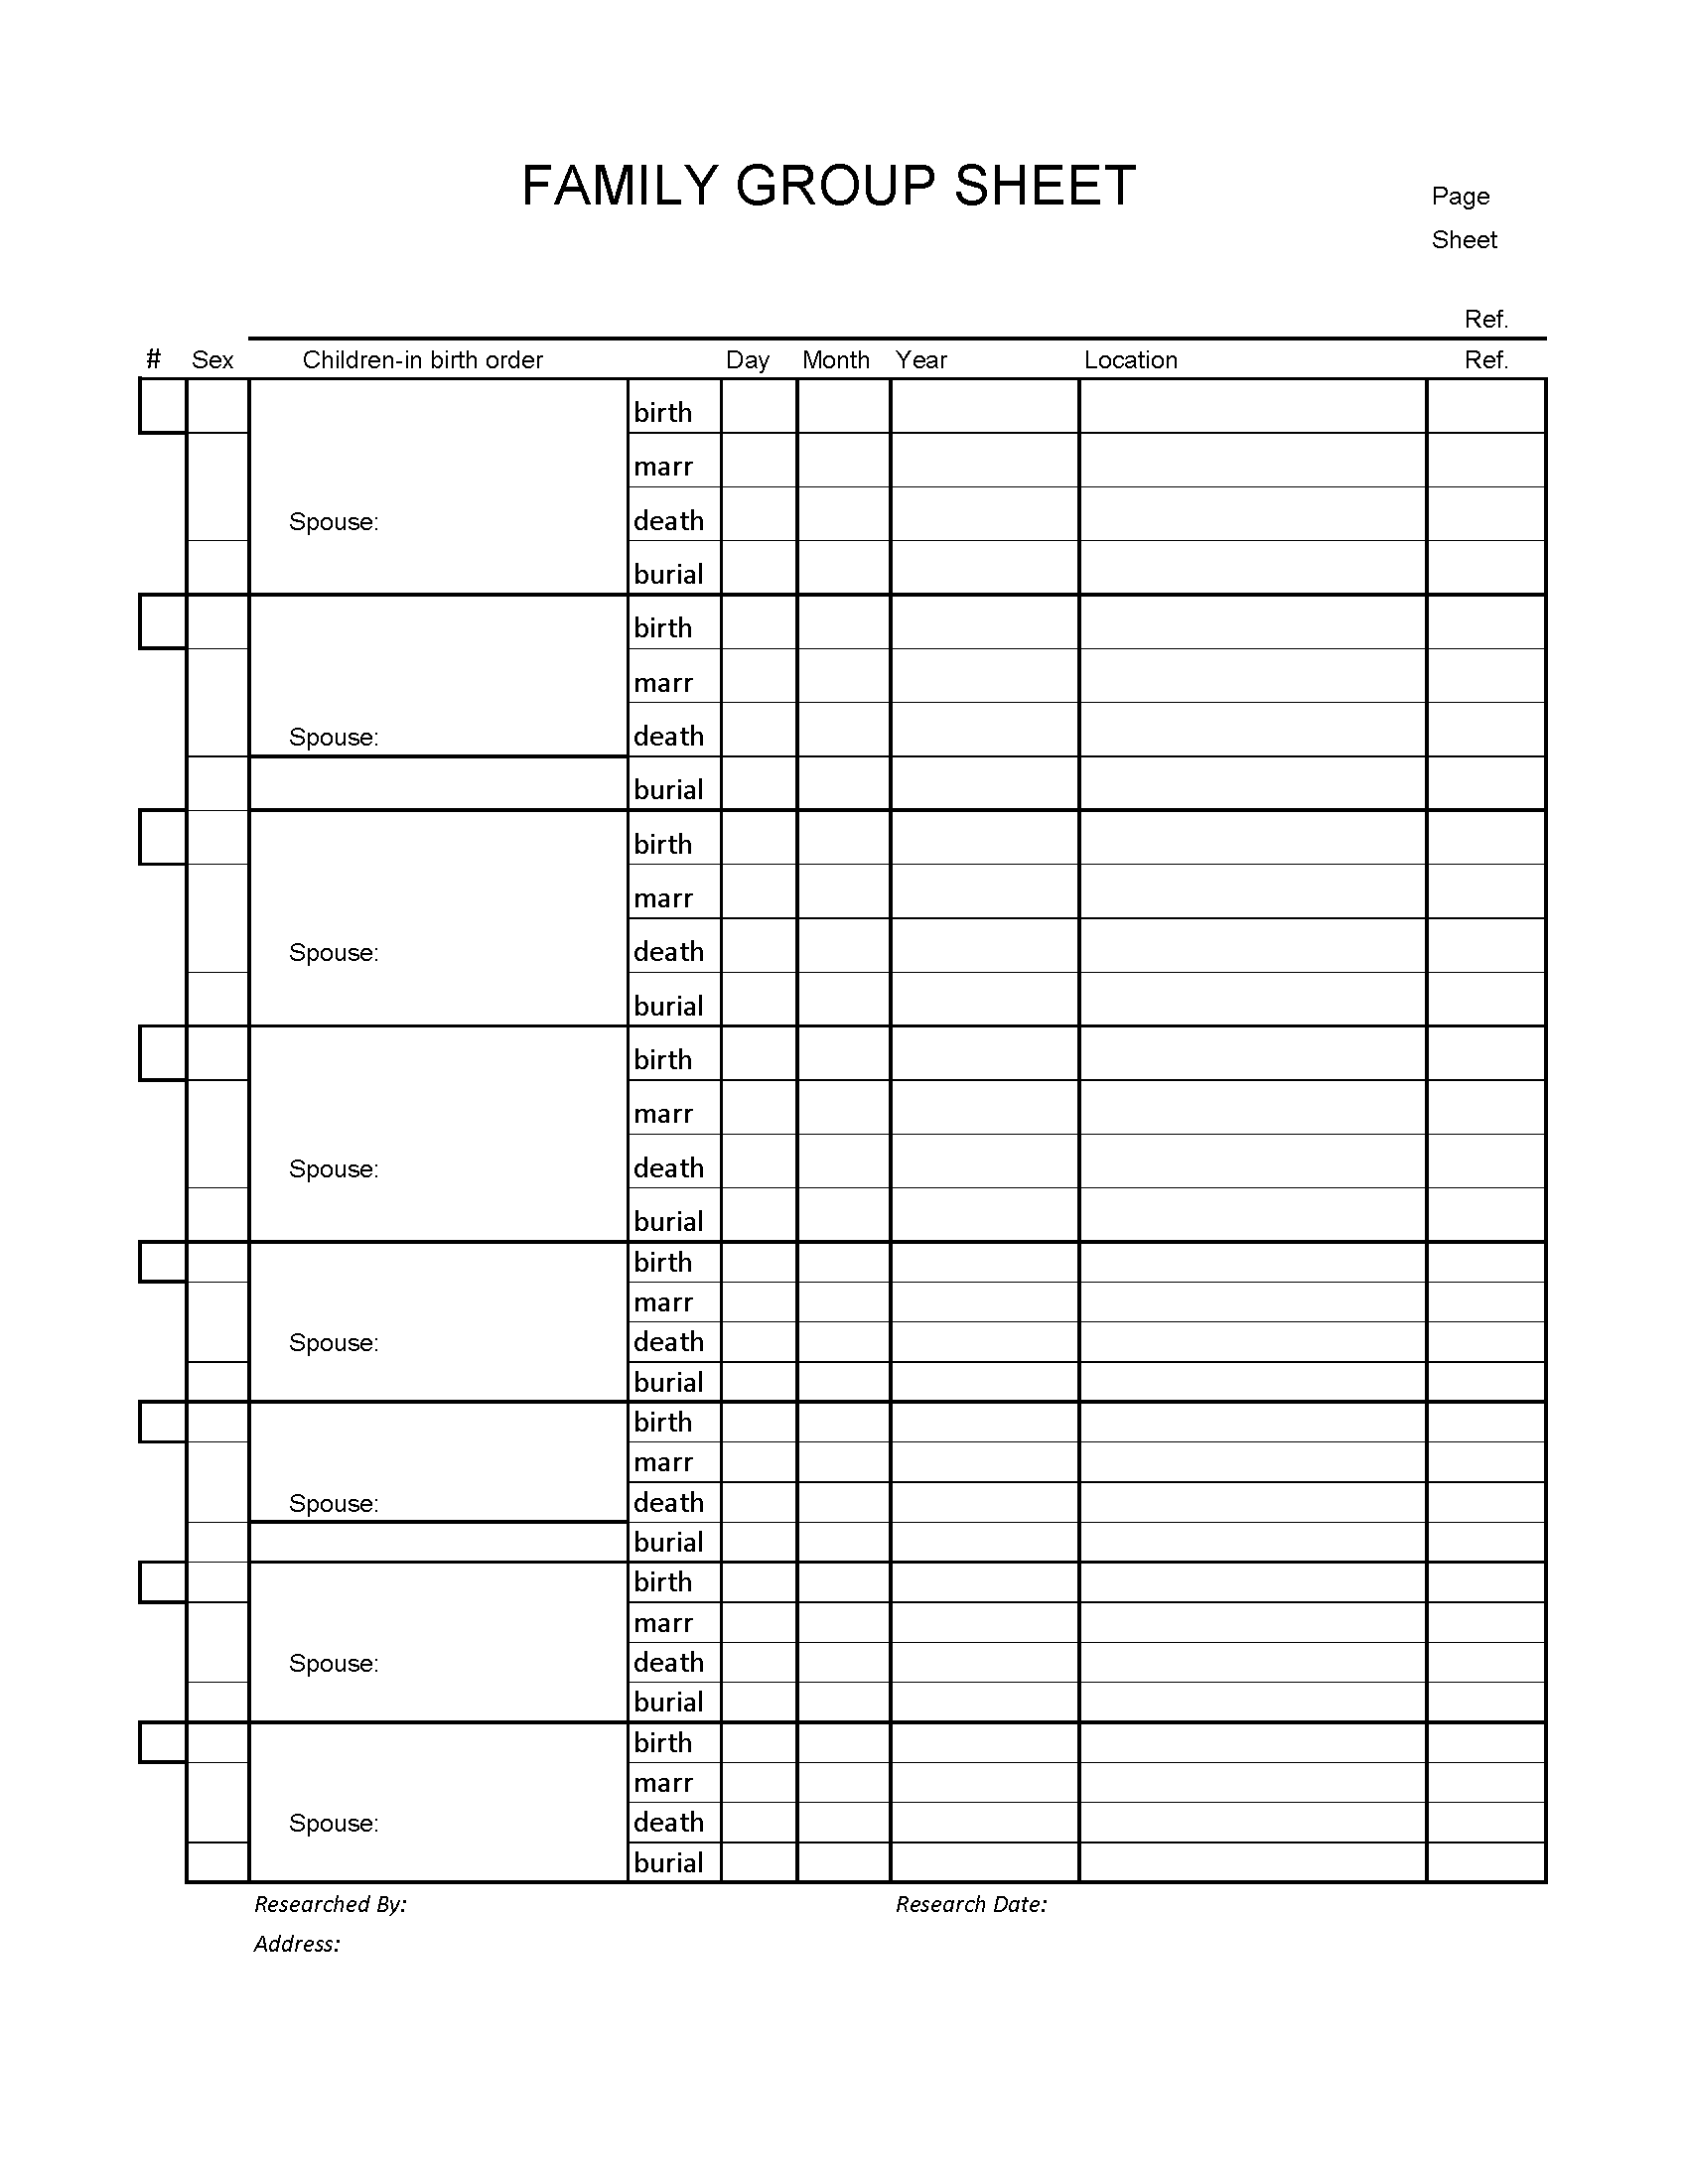 Master Family Group Sheet with extra slots for additional children